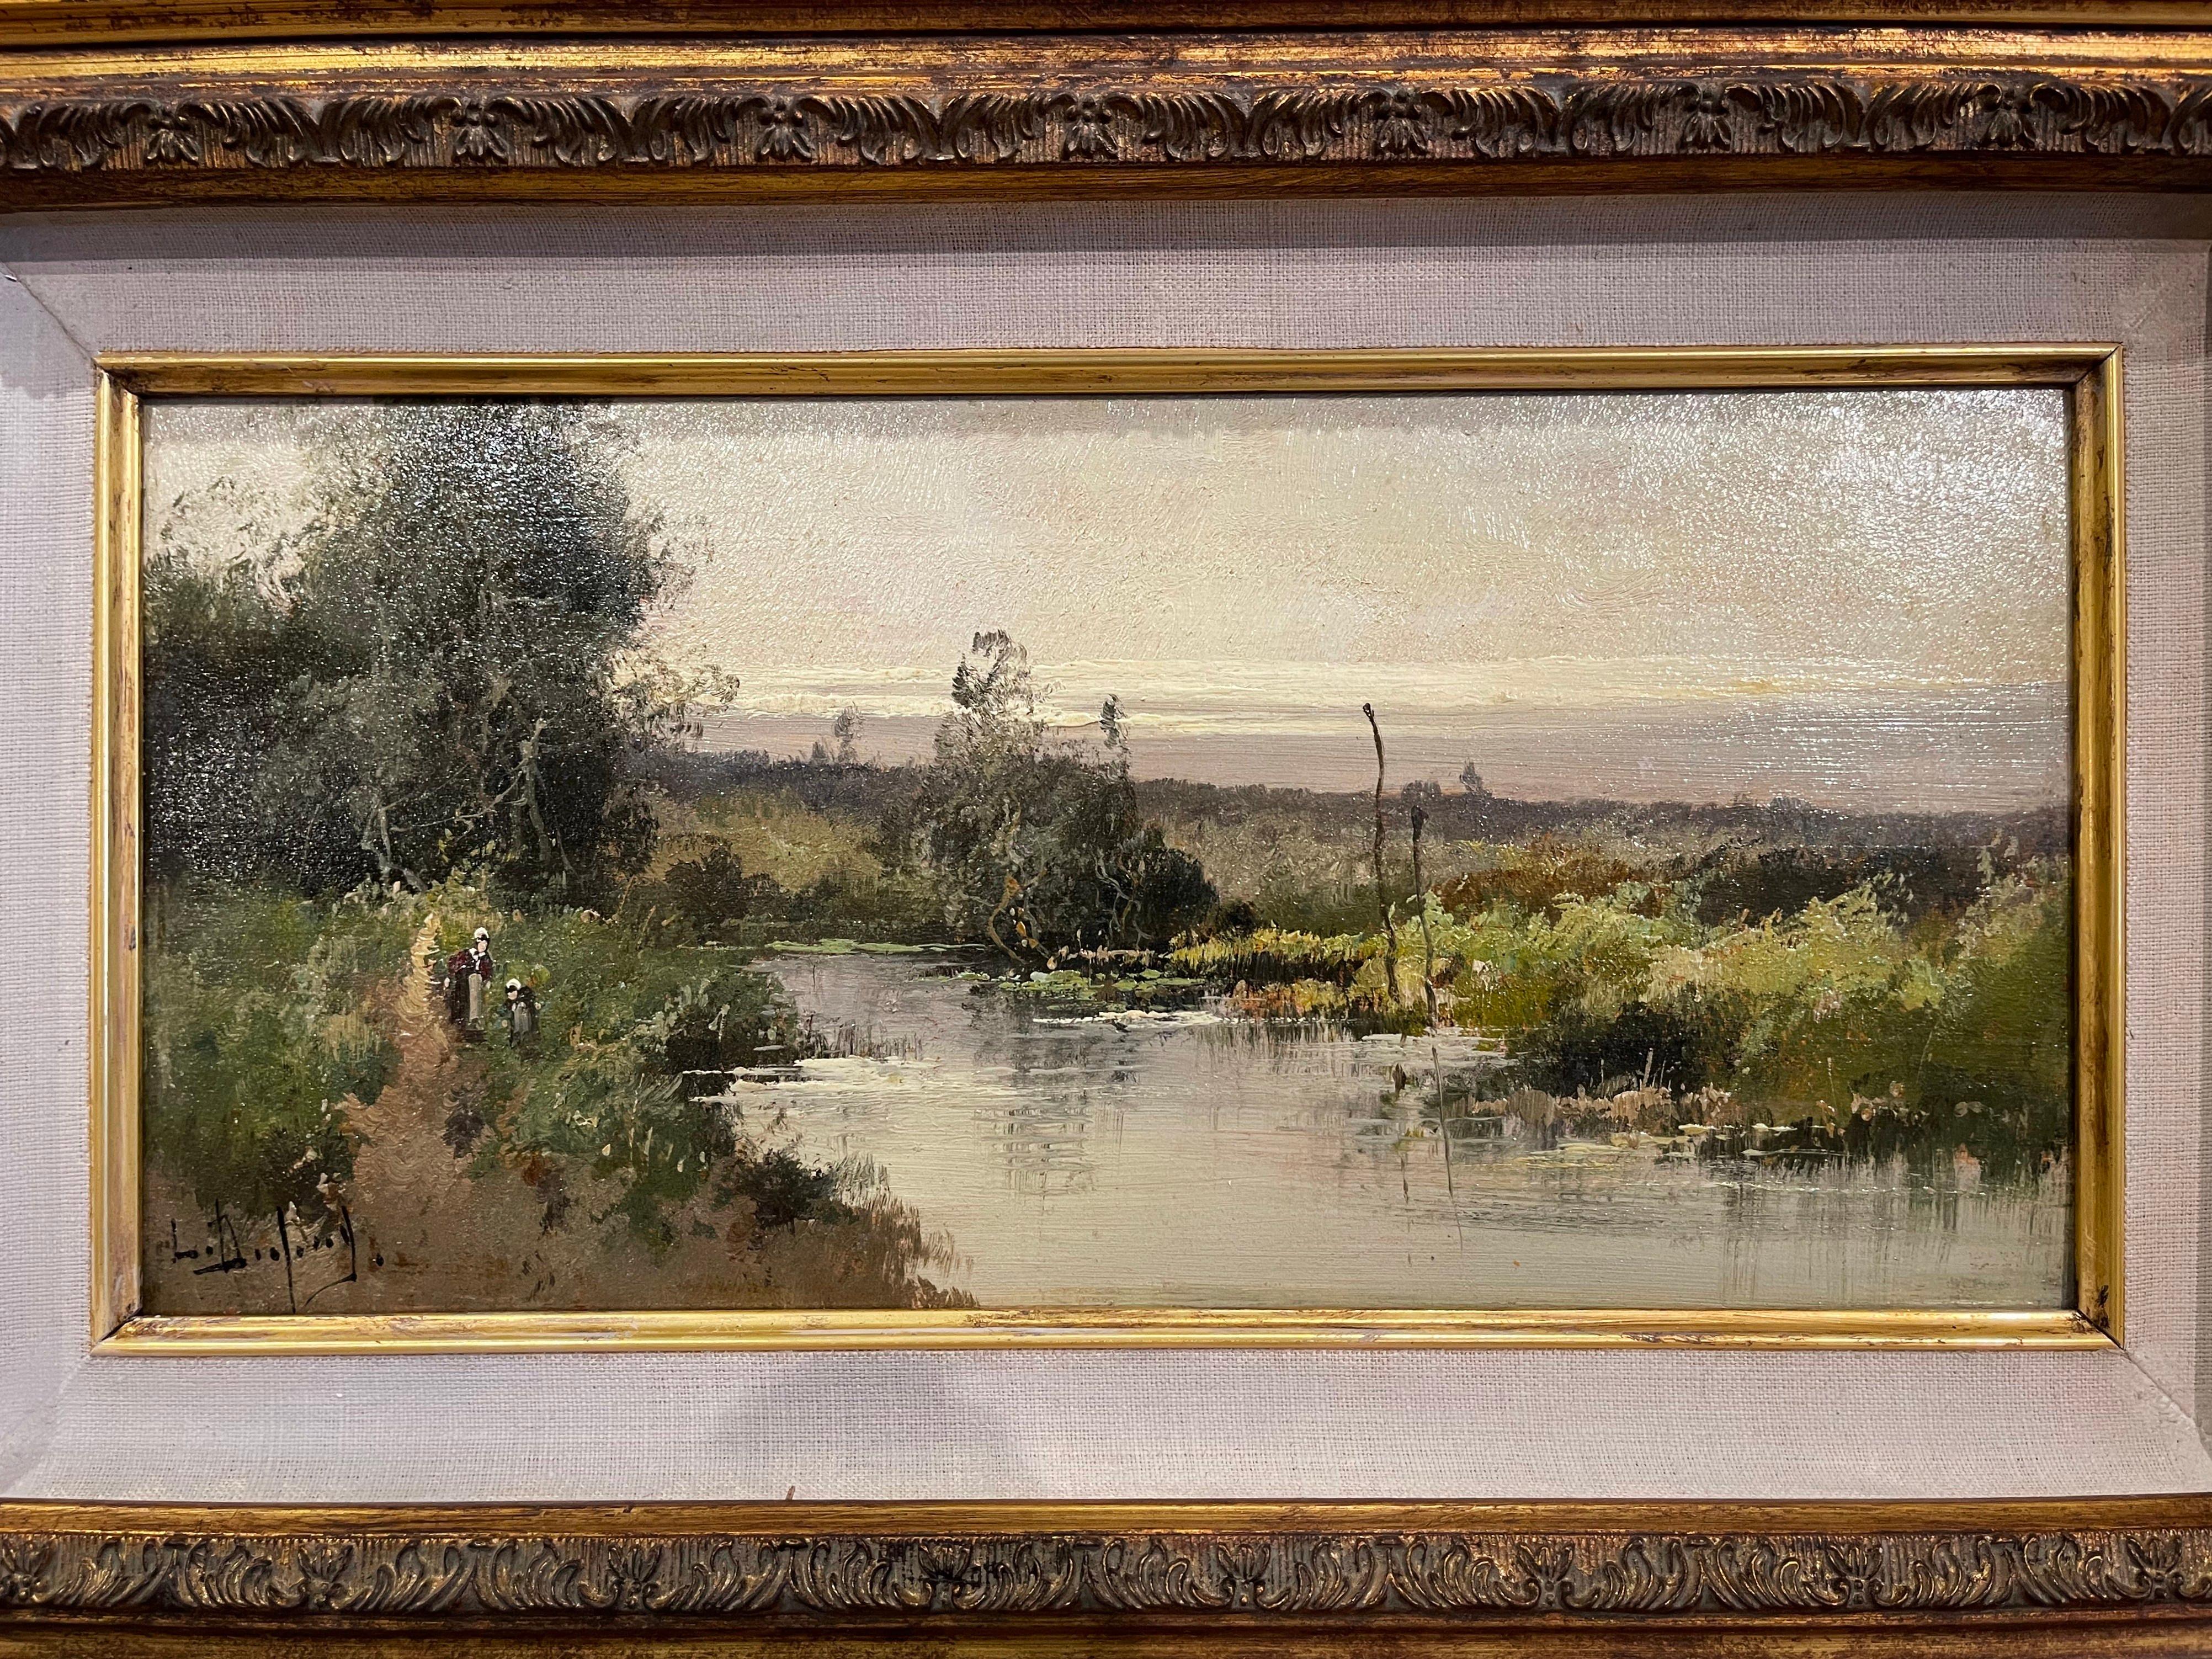 Giltwood Set of 3 Framed Oil on Board Paintings Signed Leon Dupuy for E. Galien-Laloue For Sale